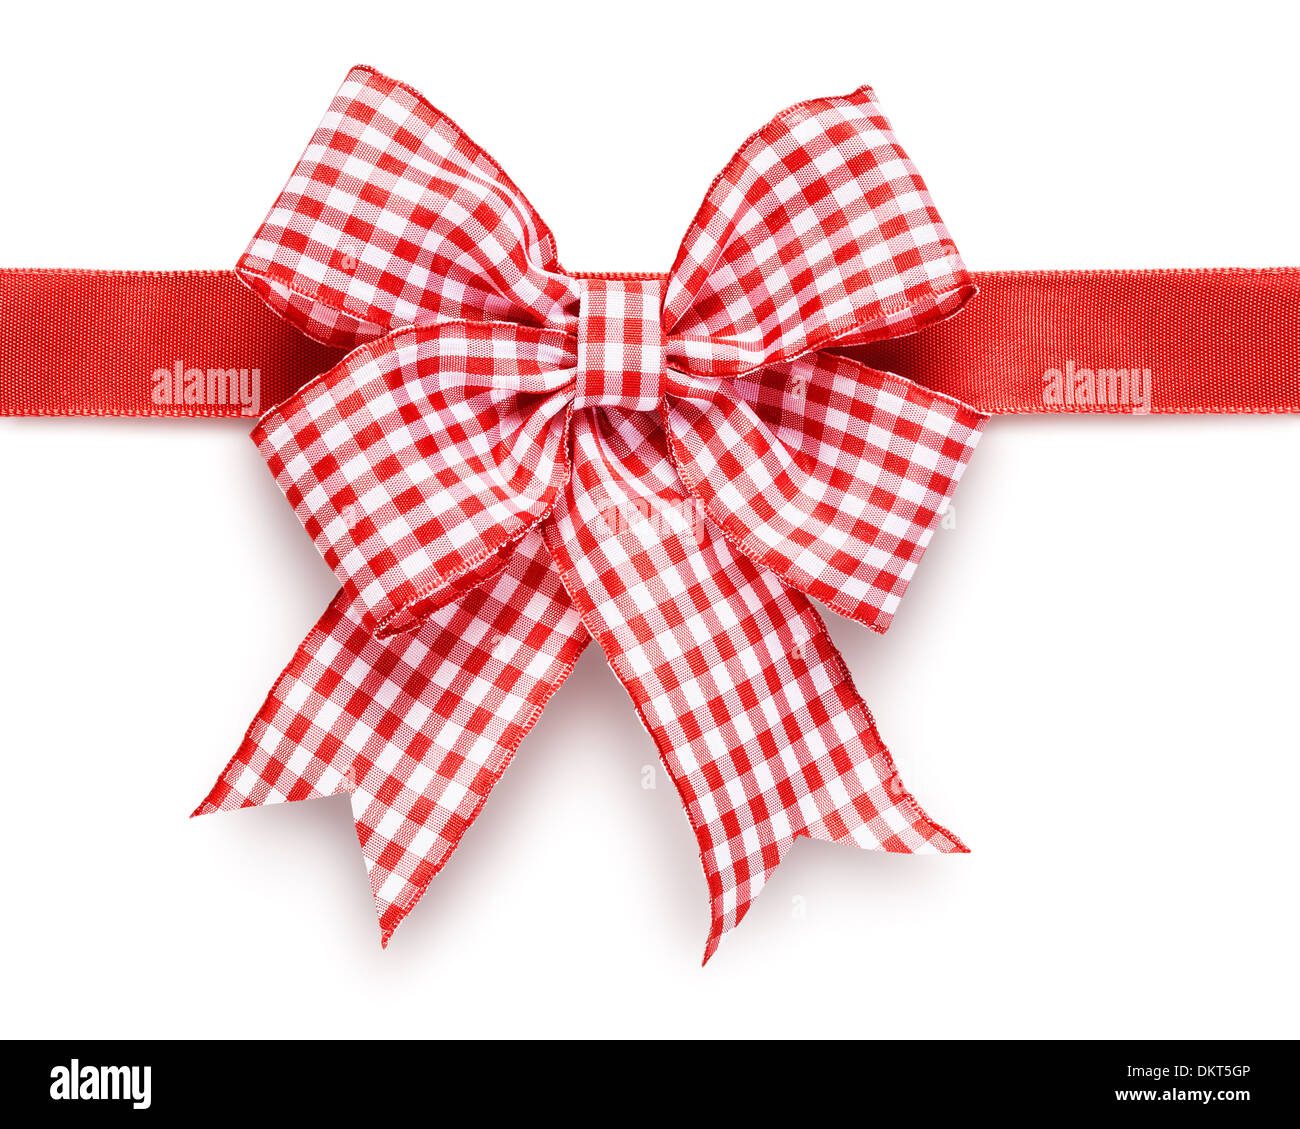 Red and white checkered ribbon bow isolated on white background